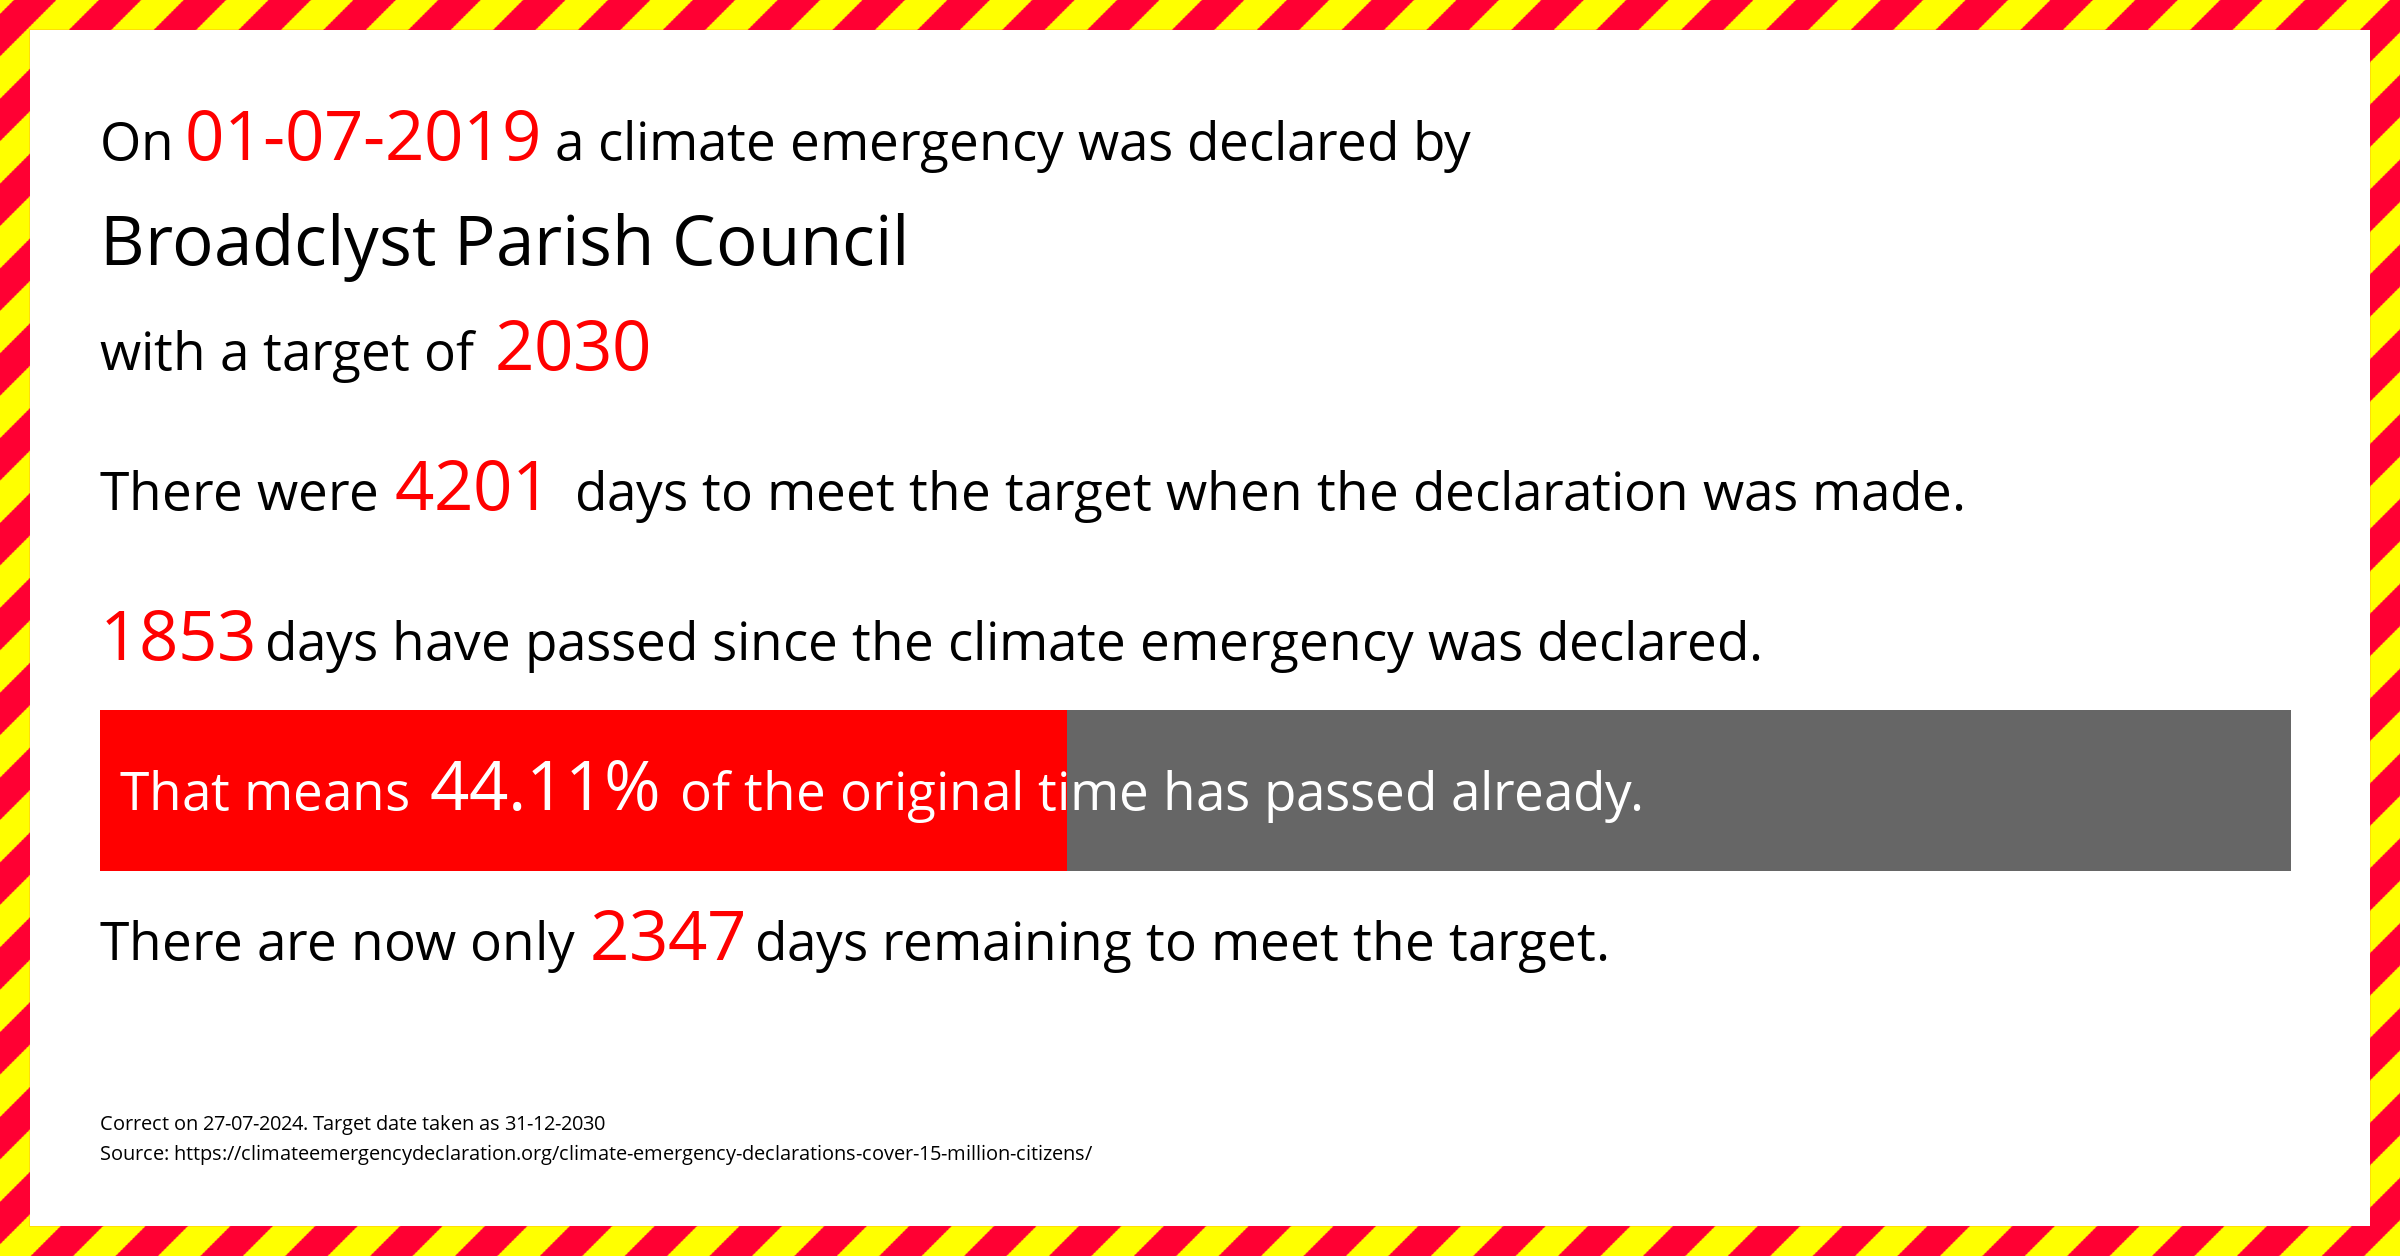 Broadclyst Parish Council declared a Climate emergency on Monday 1st July 2019, with a target of 2030.